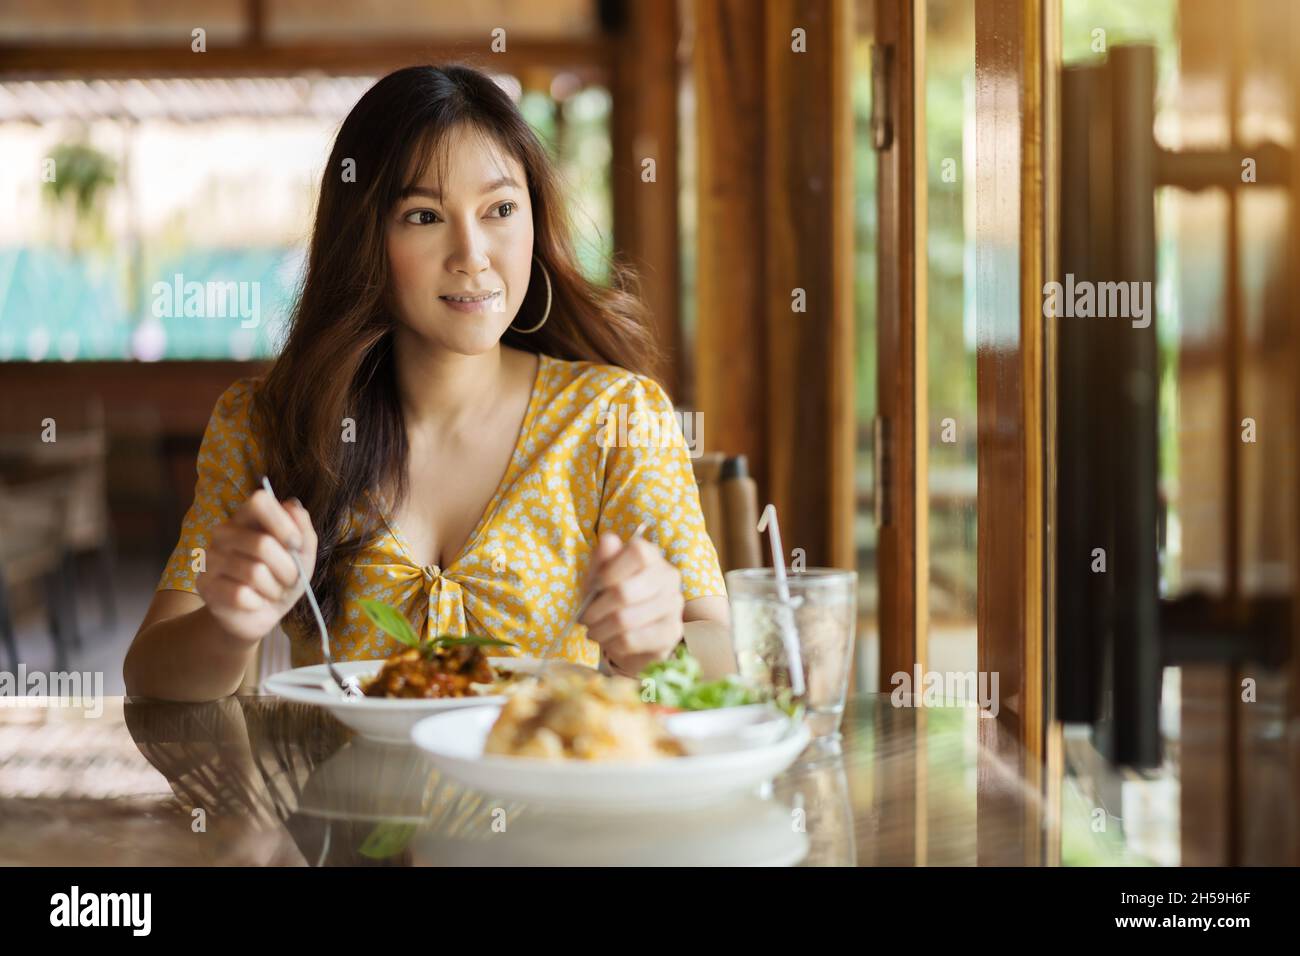 young woman eating spaghetti food in restaurant Stock Photo